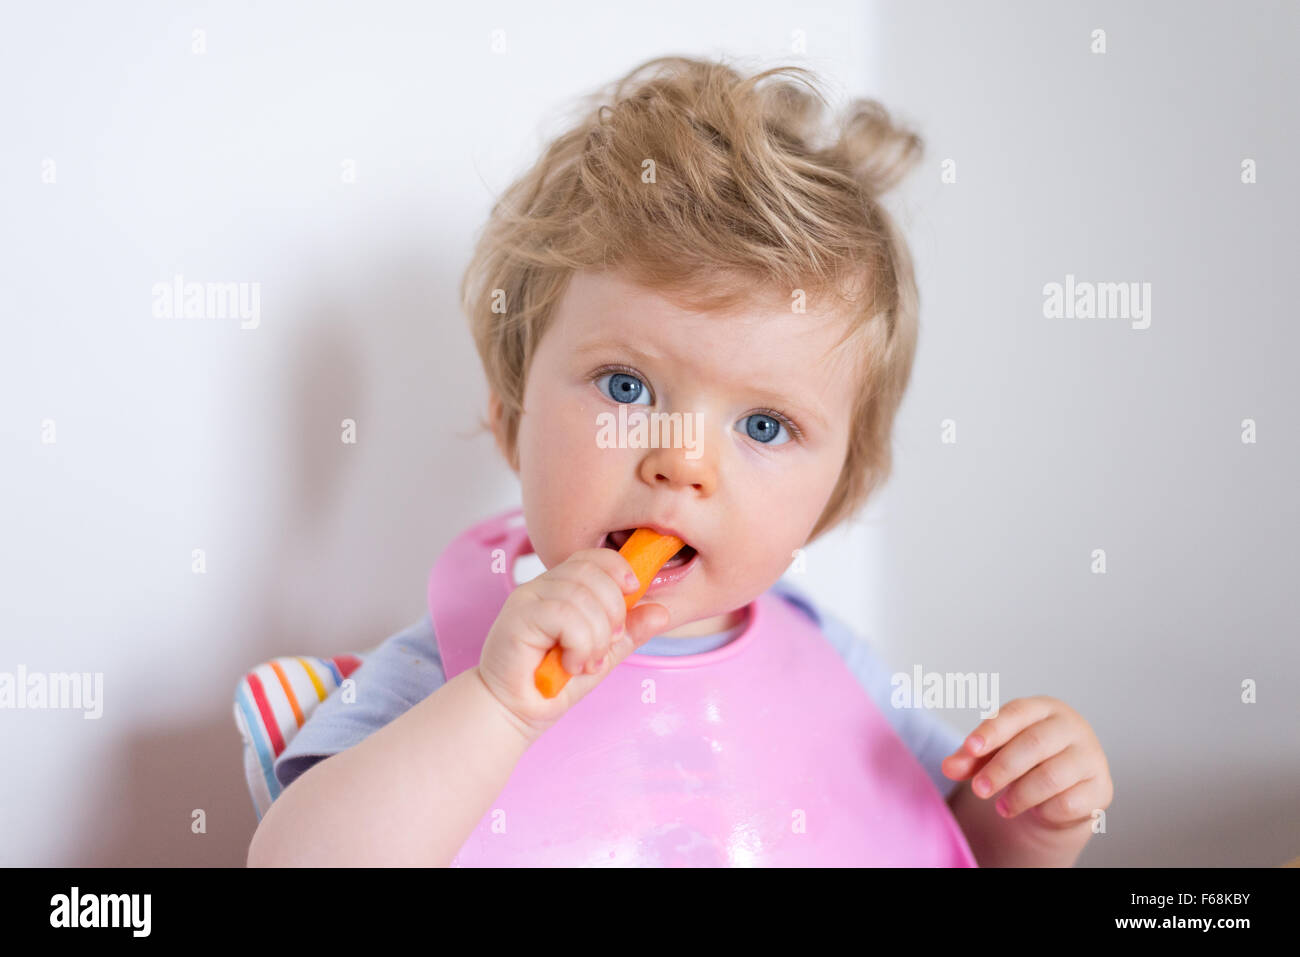 One year old baby eating a healthy carrots and vegetables Stock Photo